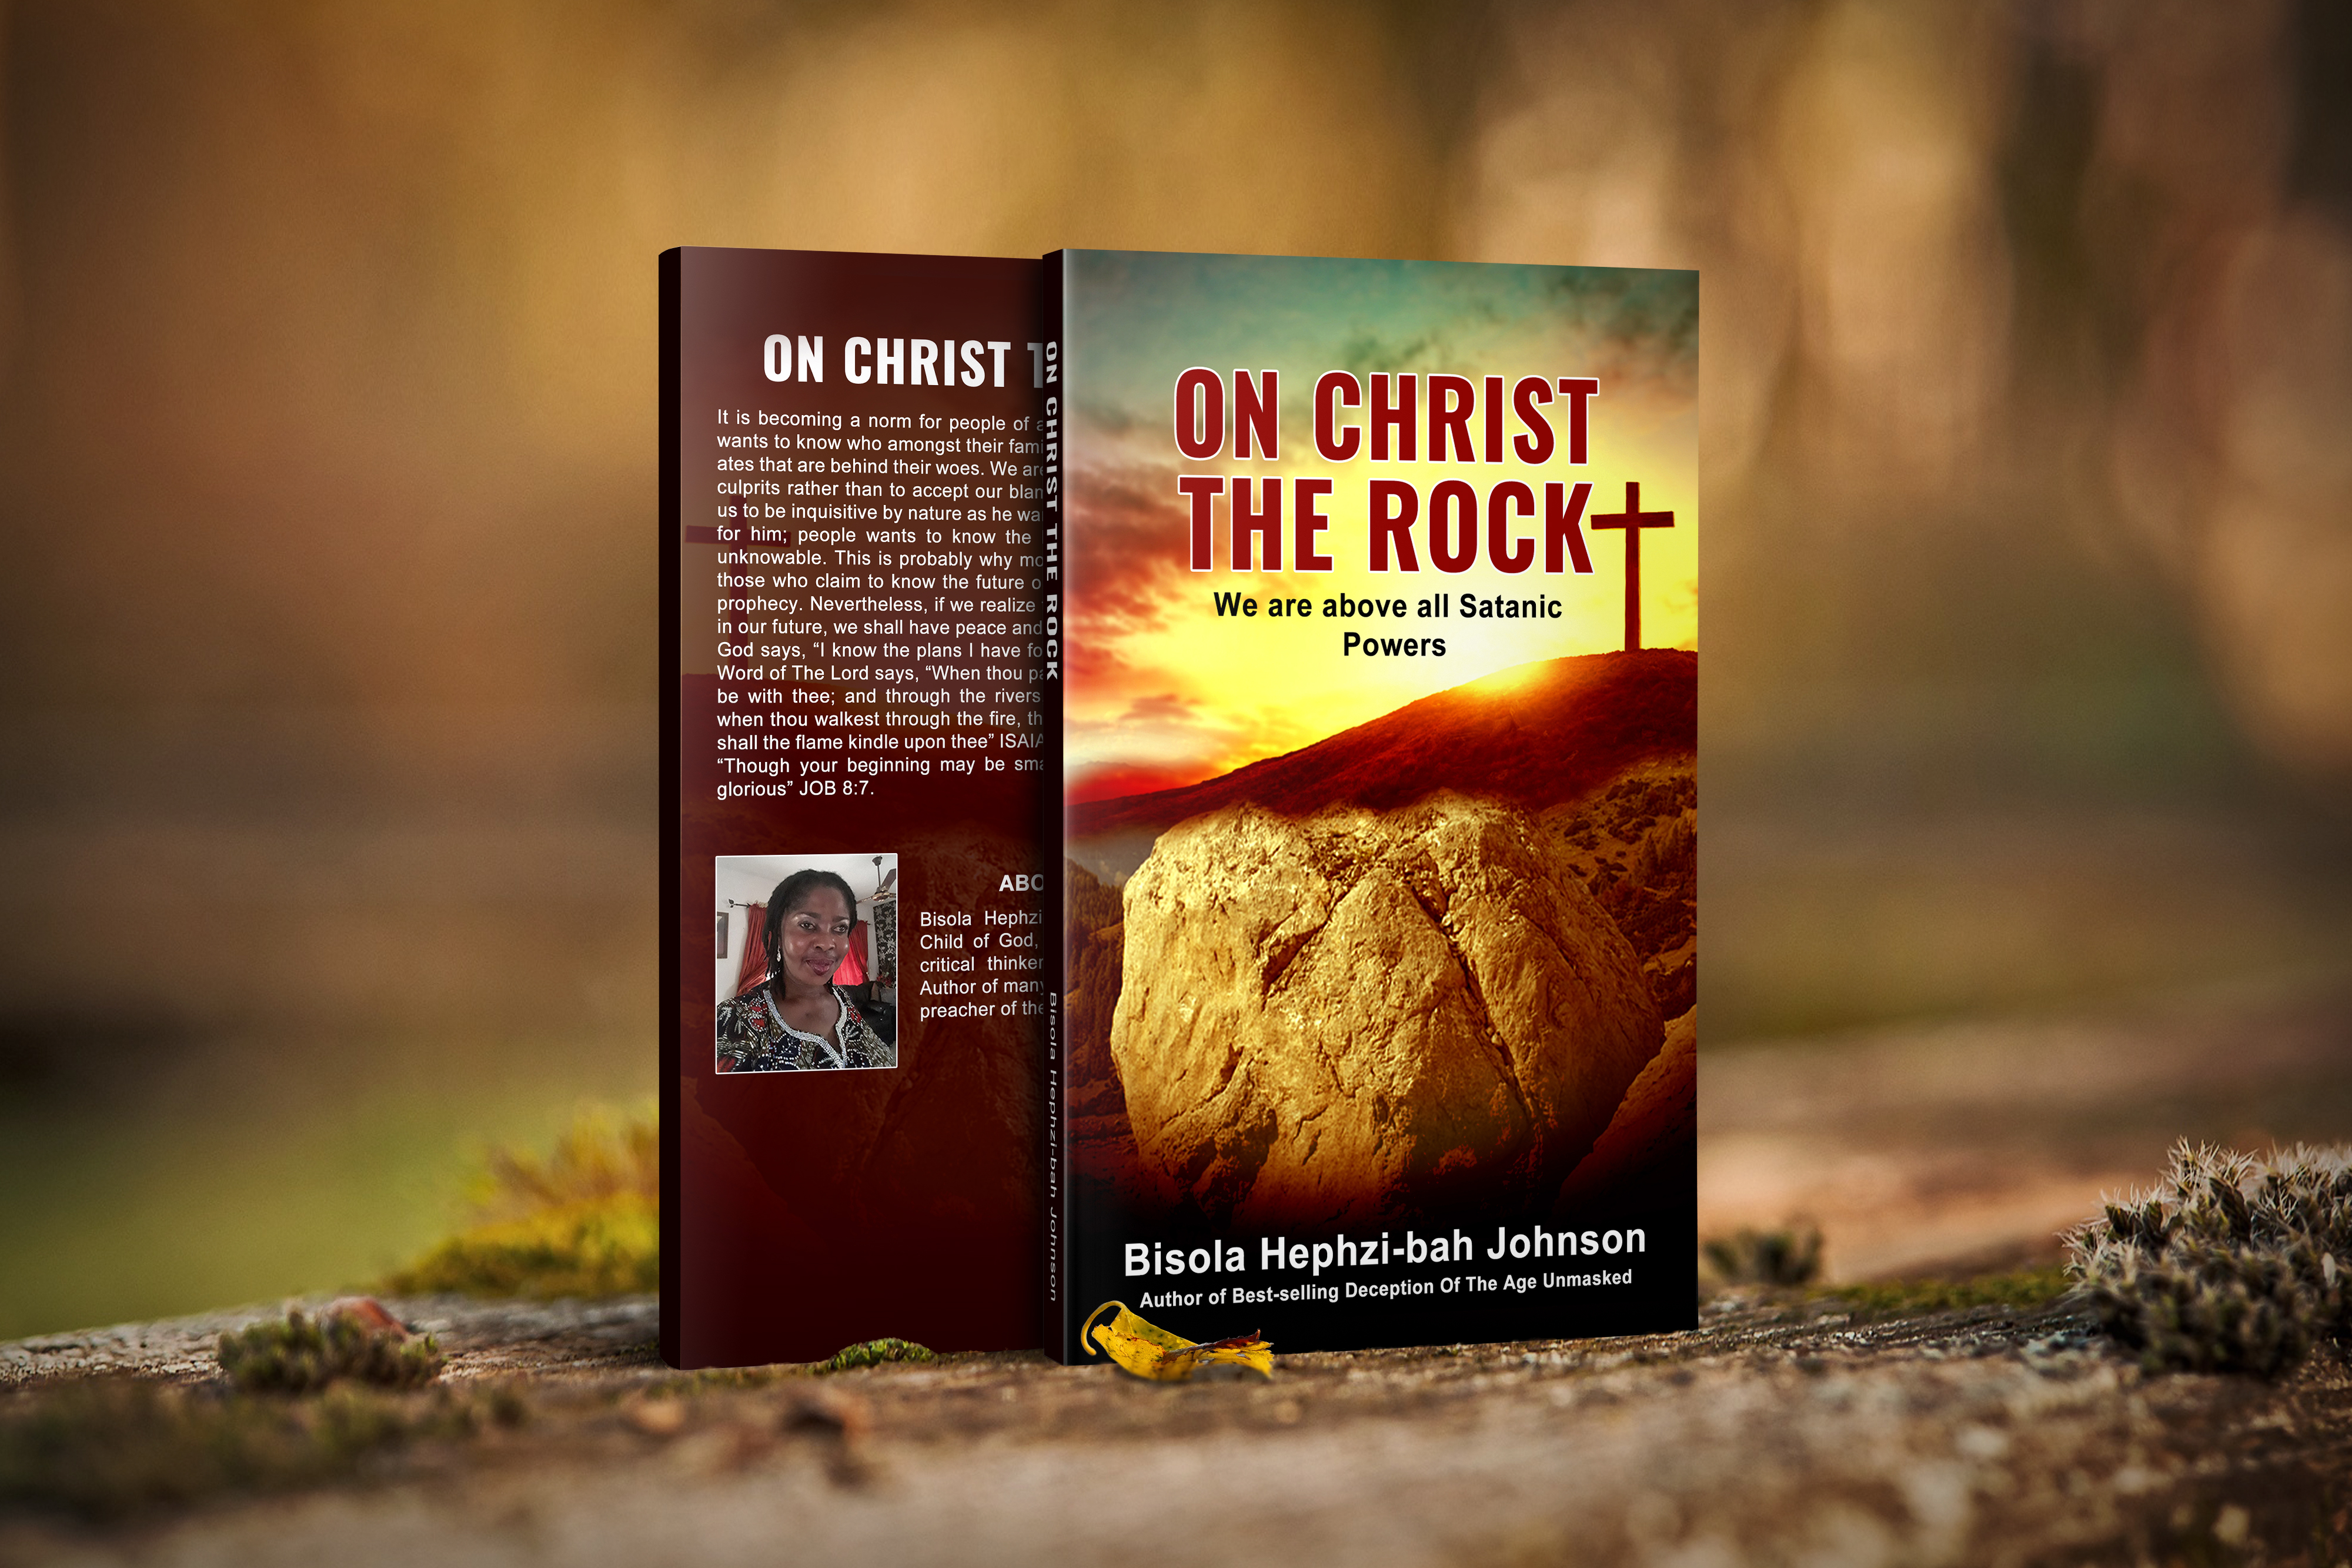 ON CHRIST THE ROCK